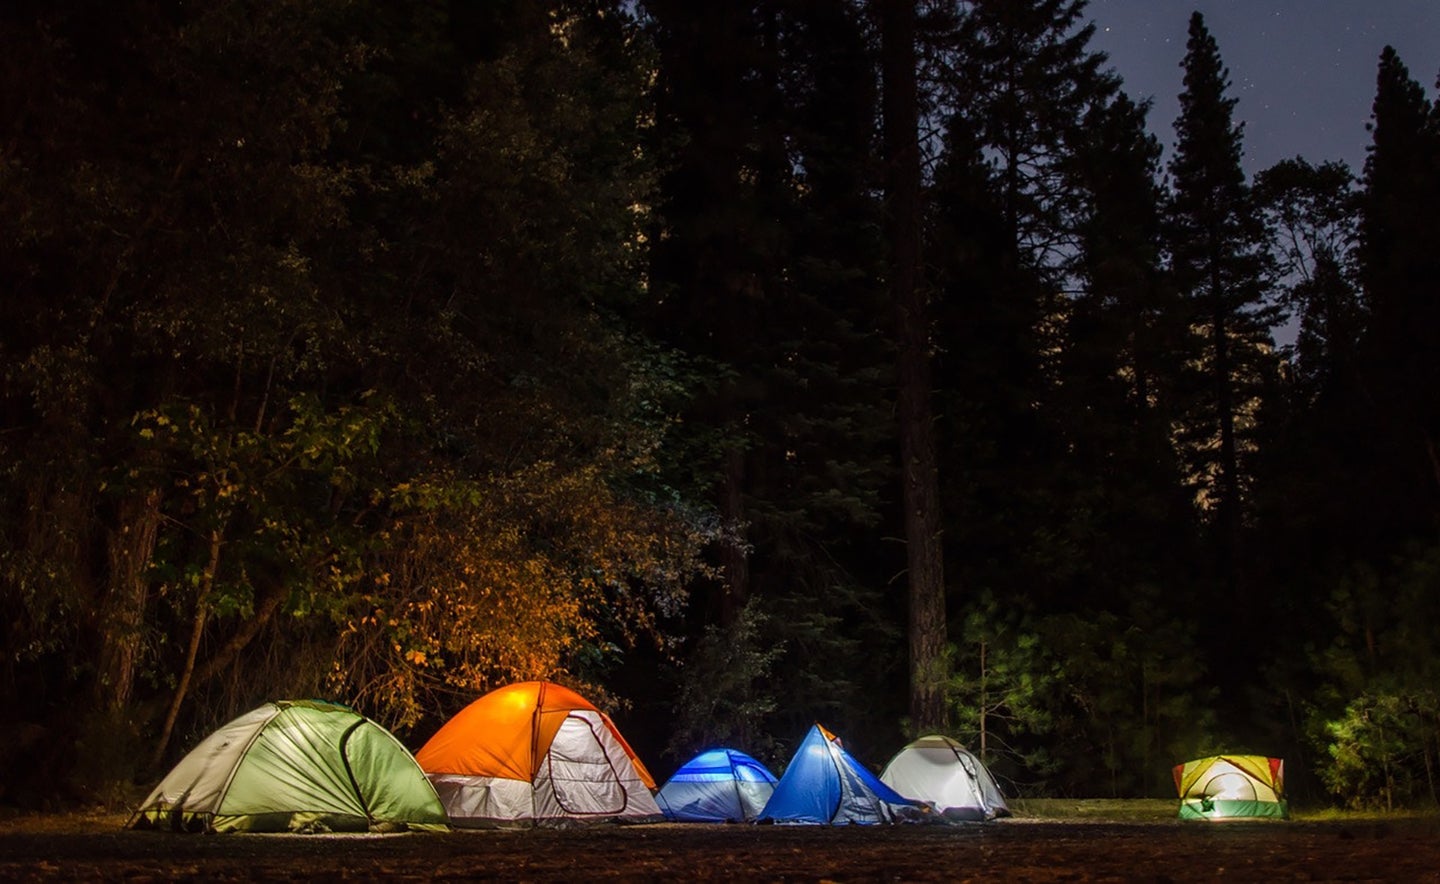 A group of tents in the woods at night.